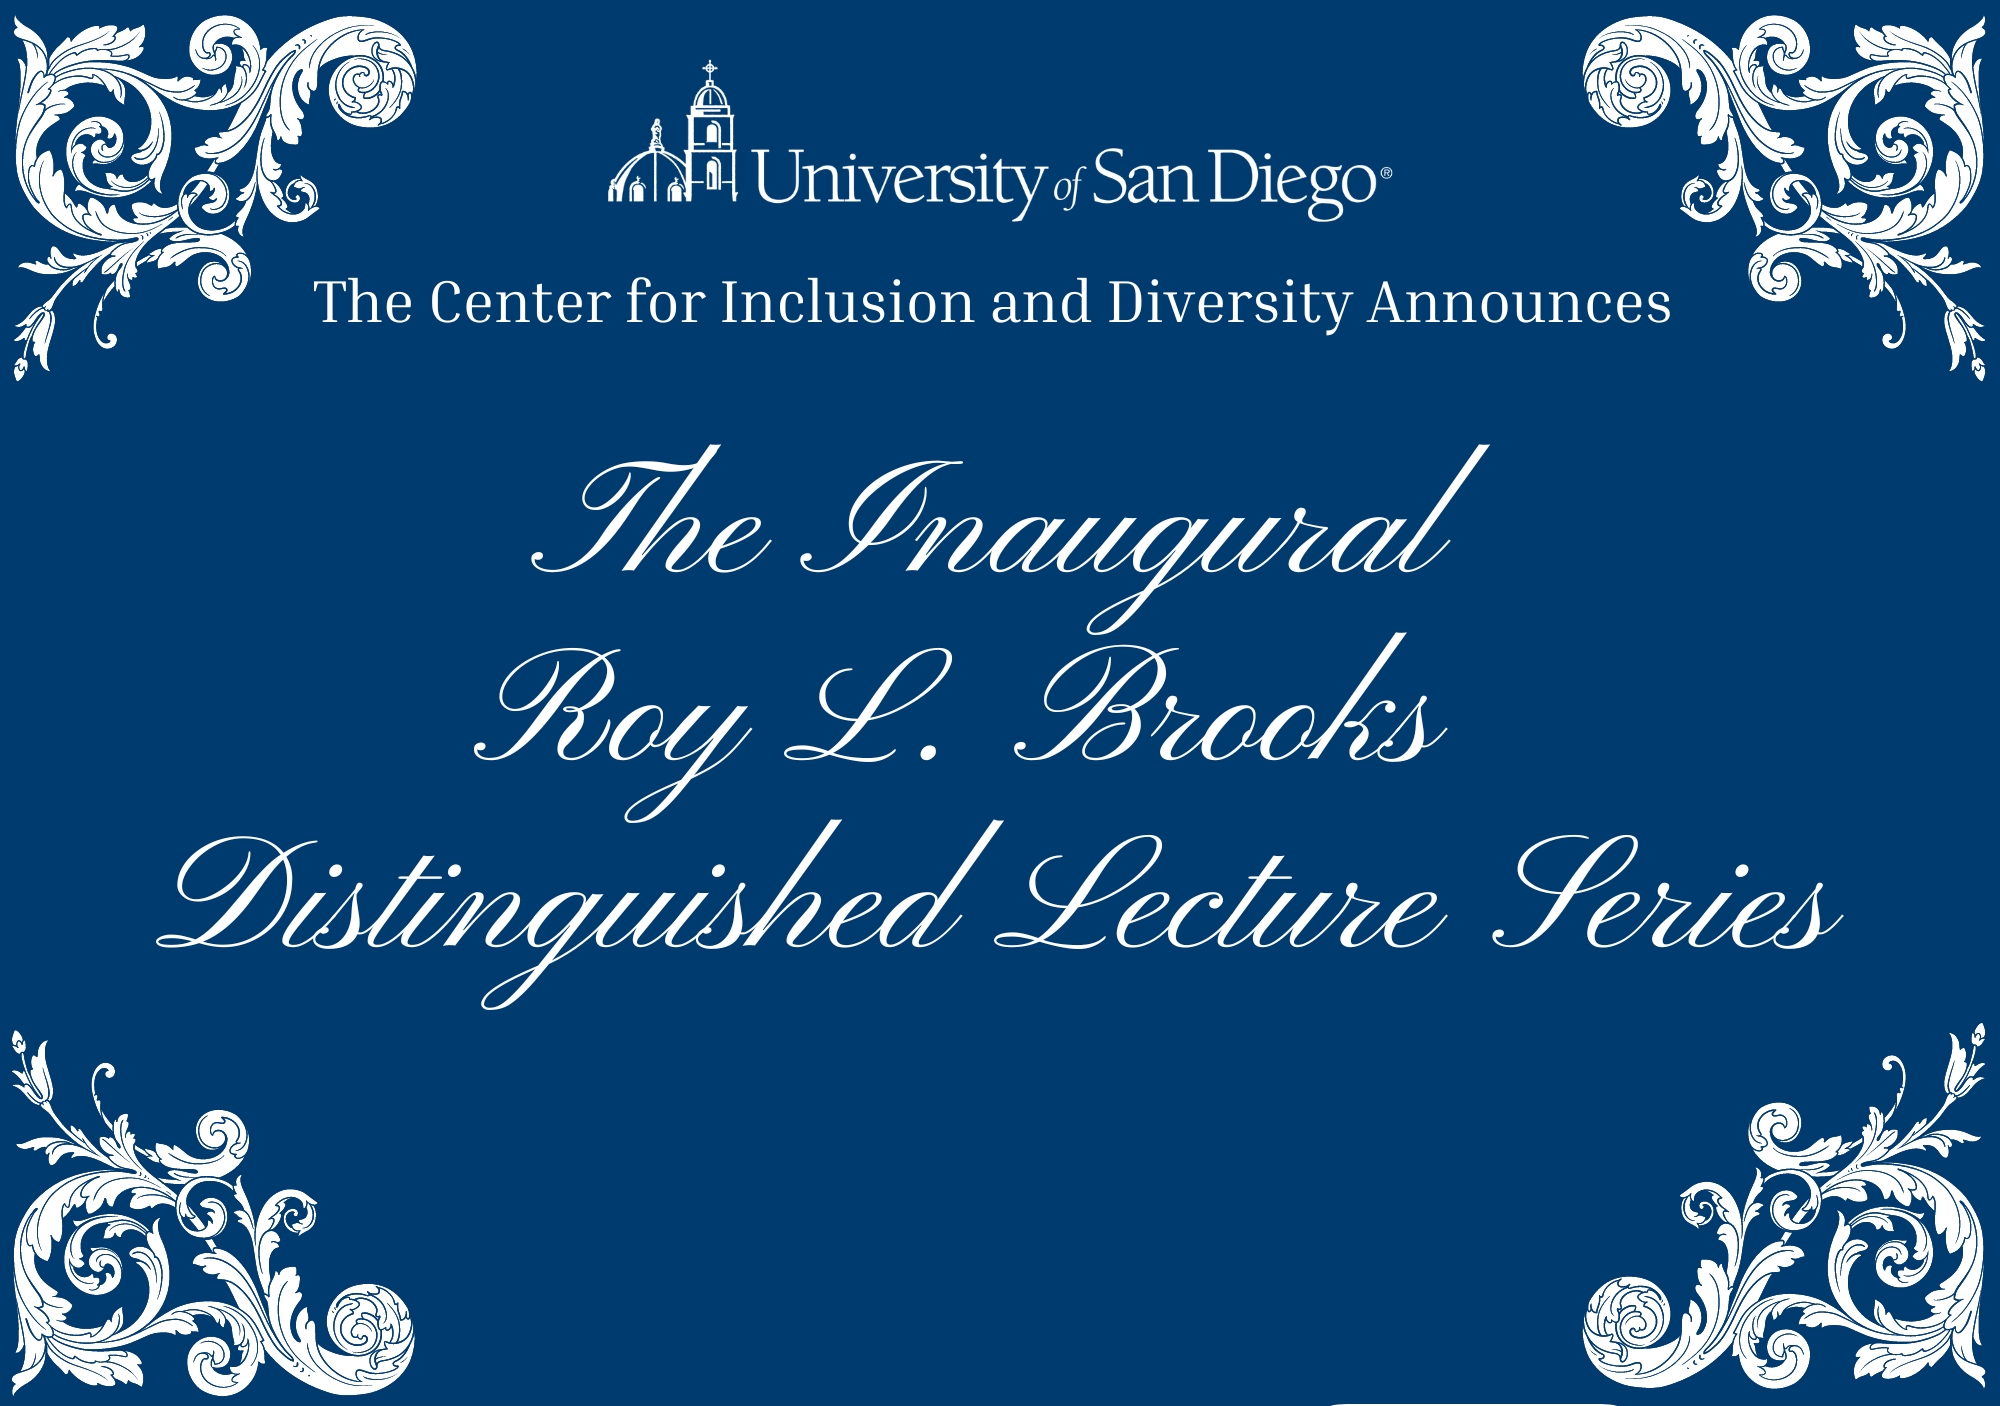 Invitation to the inaugural Roy L. Brooks Distinguished Lecture Series